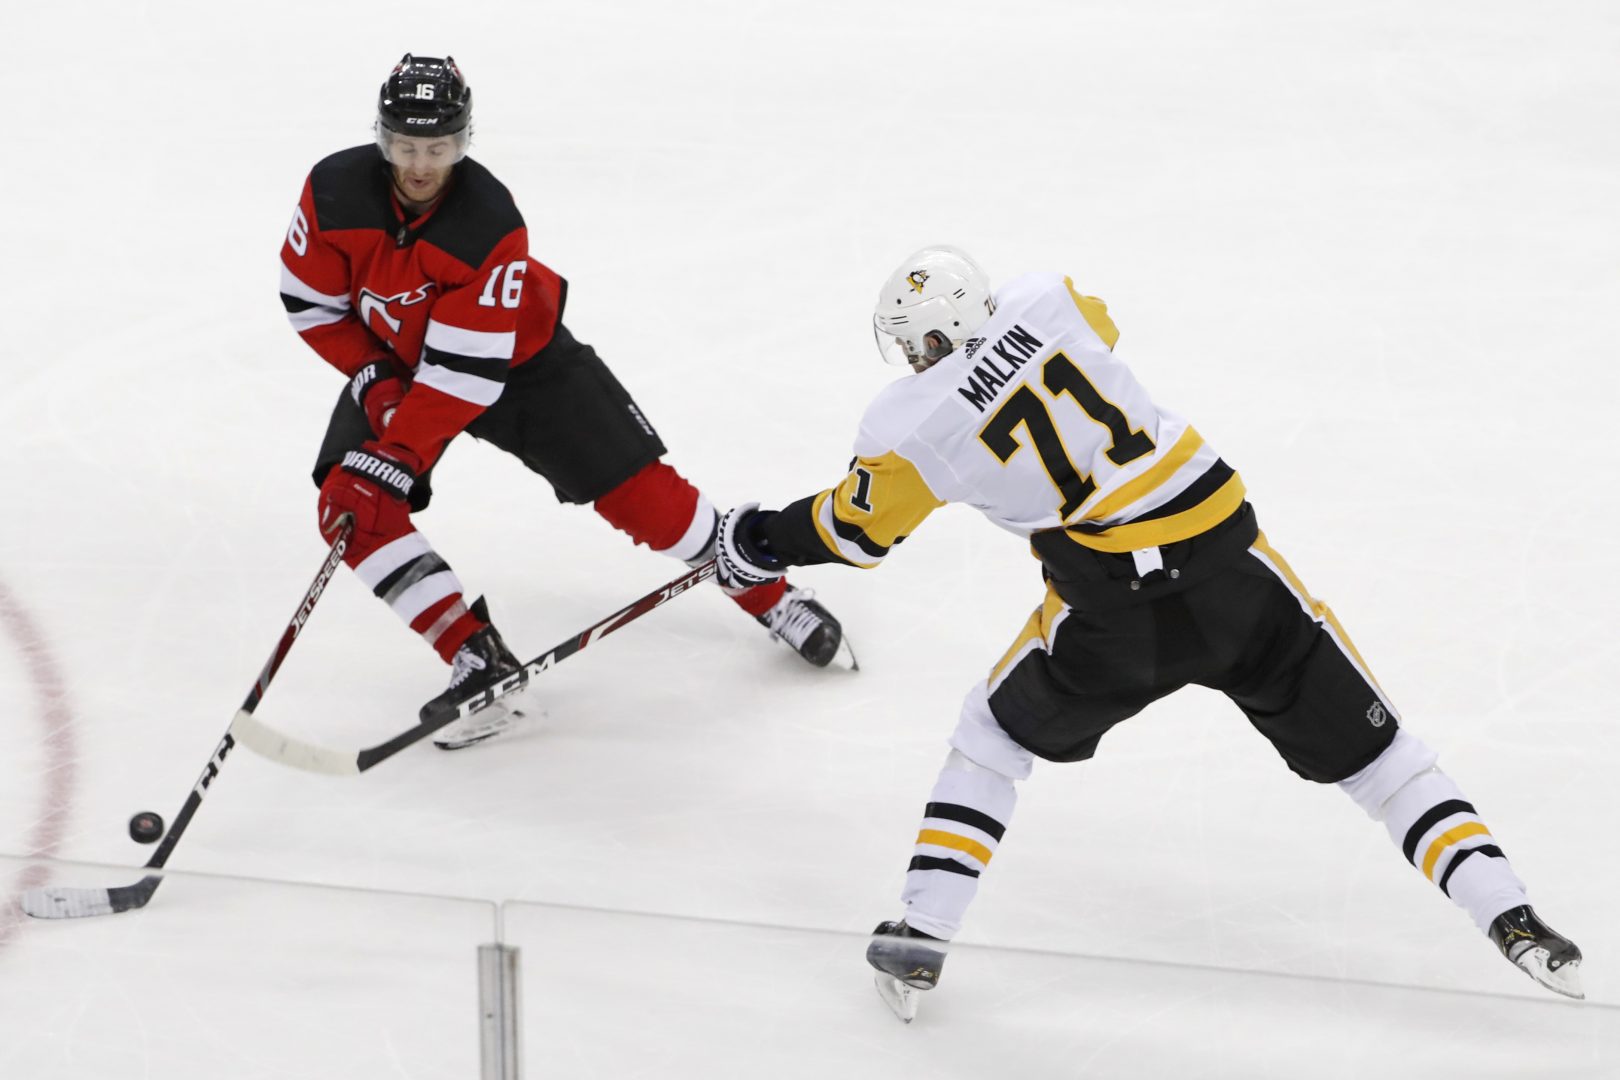 Who Would You Rather Have? Evgeni Malkin vs. Sidney Crosby